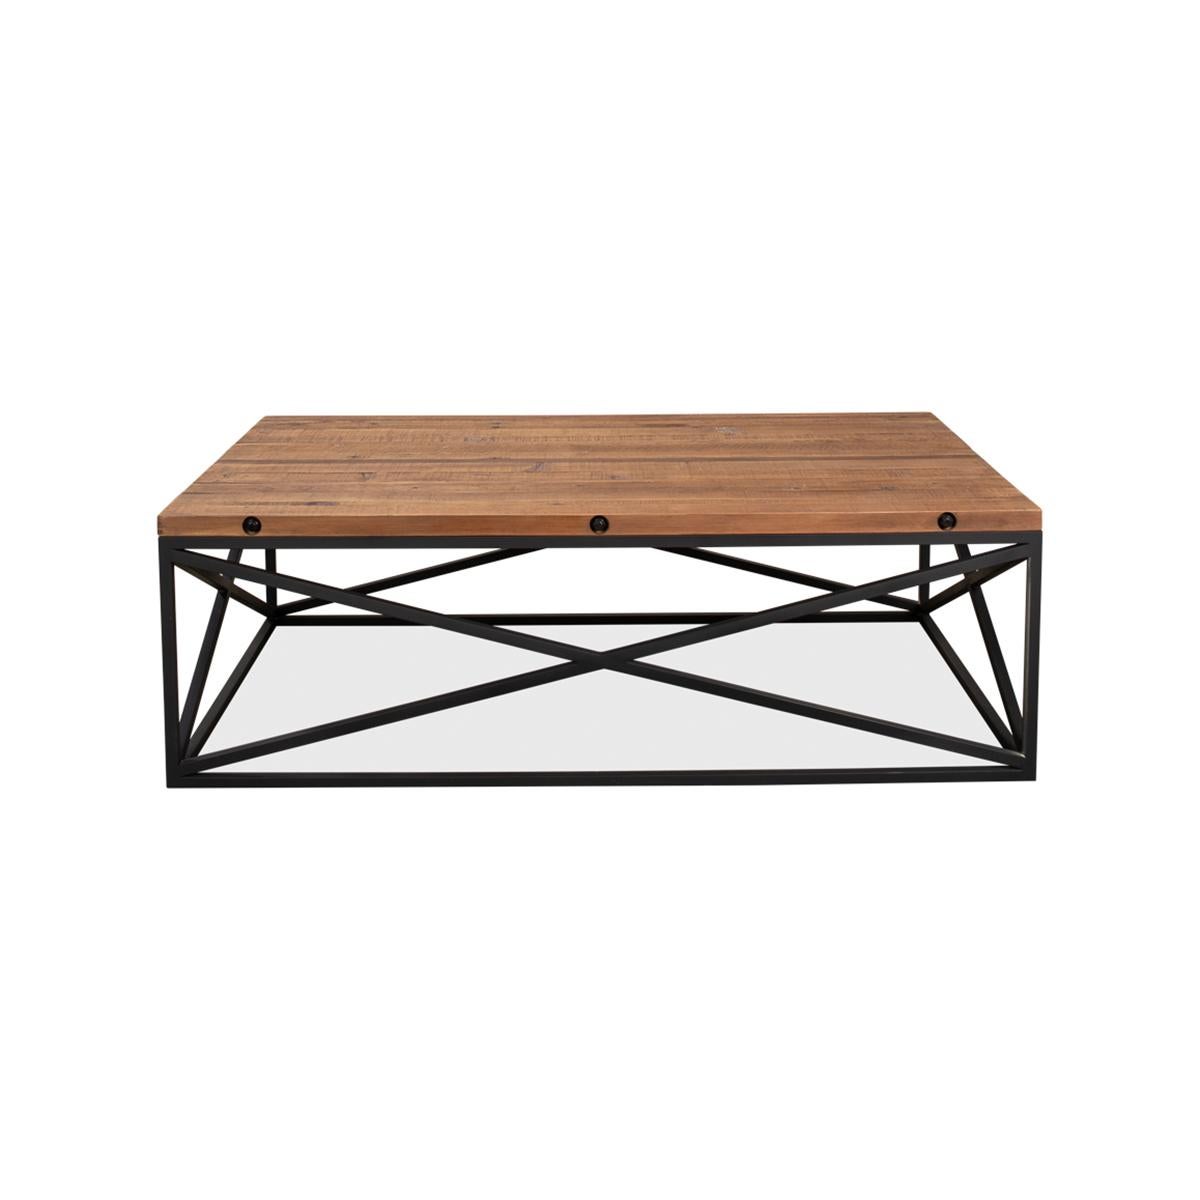 With reclaimed pine board top above an x frame cube form iron base. 

Dimensions: 55